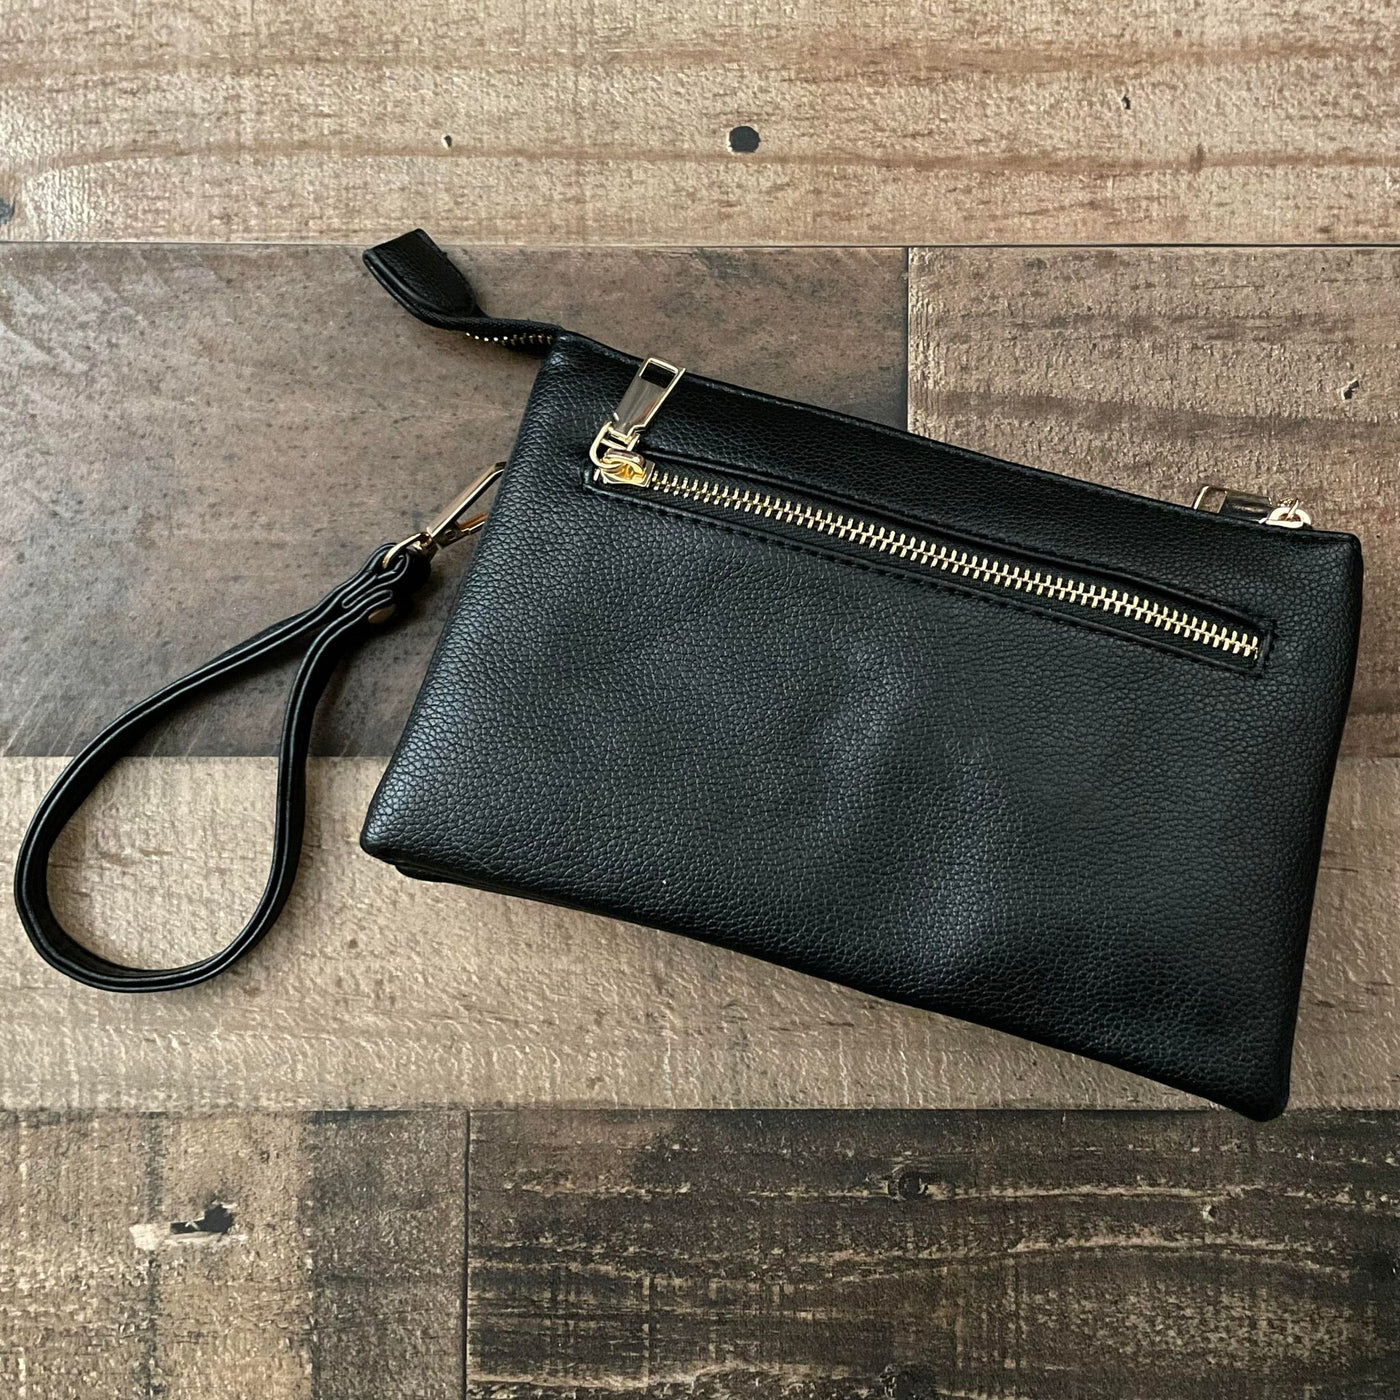 Tiny but Mighty Convertible Crossbody or Wristlet Purse